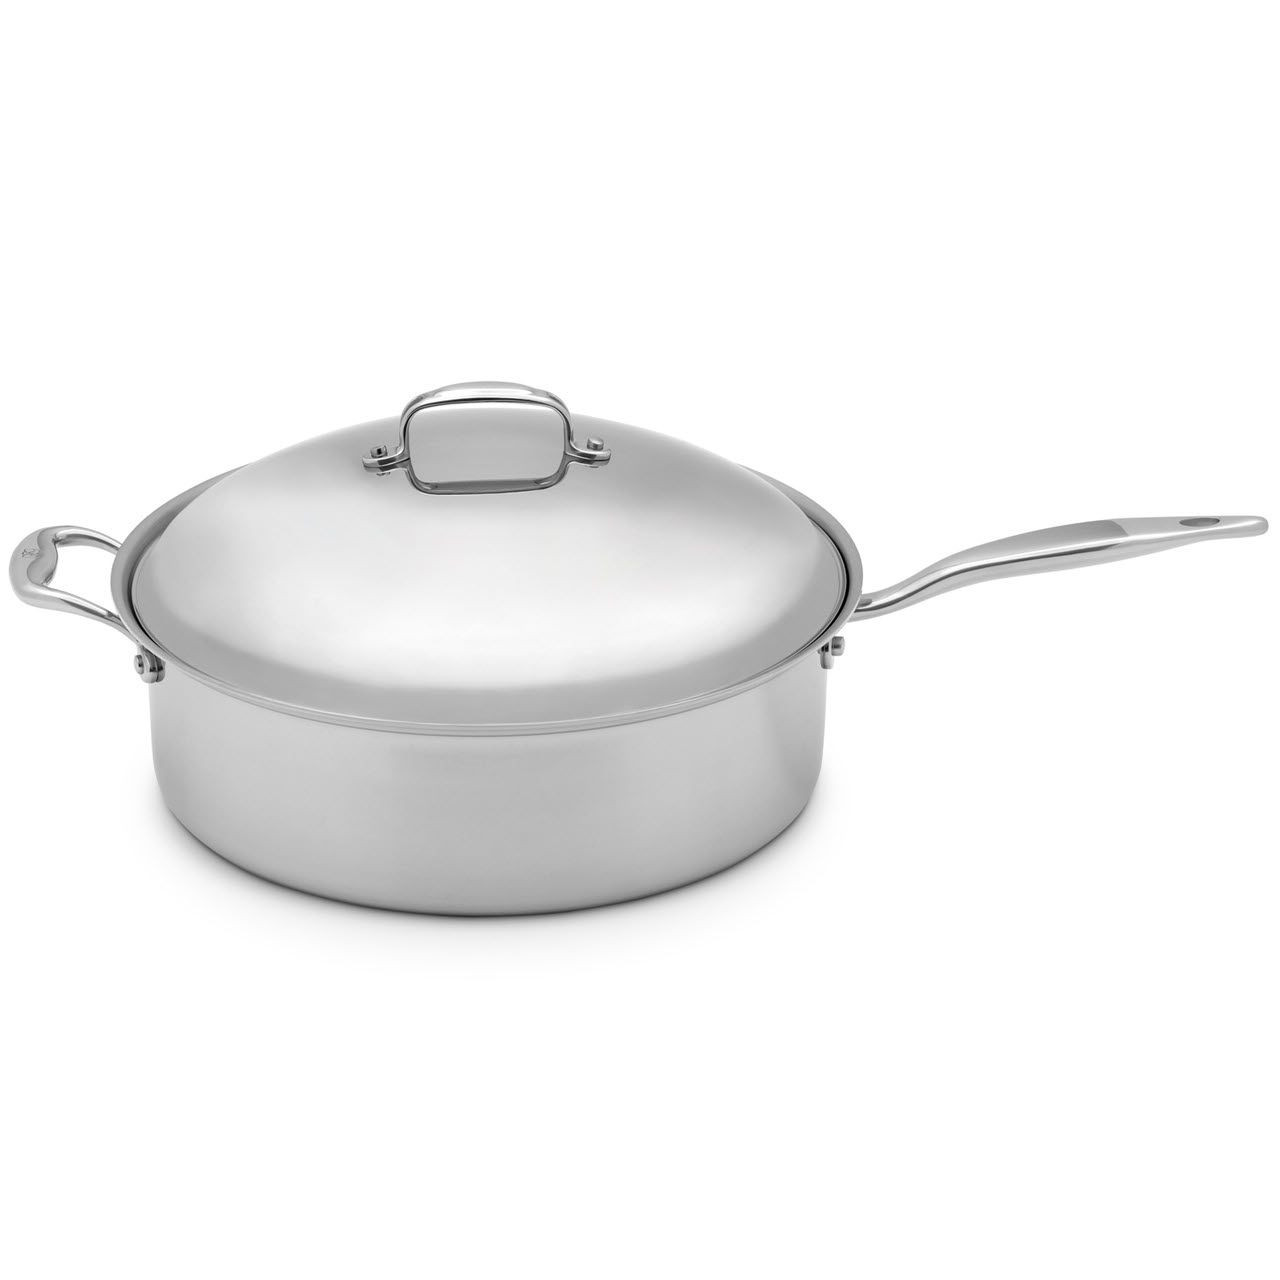 https://cdn11.bigcommerce.com/s-21kj3ntgv1/images/stencil/1280x1280/products/482/2903/Heritage-Steel-8-Quart-Family-Saute-Pan-With-Lid-on__16545.1701645210.jpg?c=2